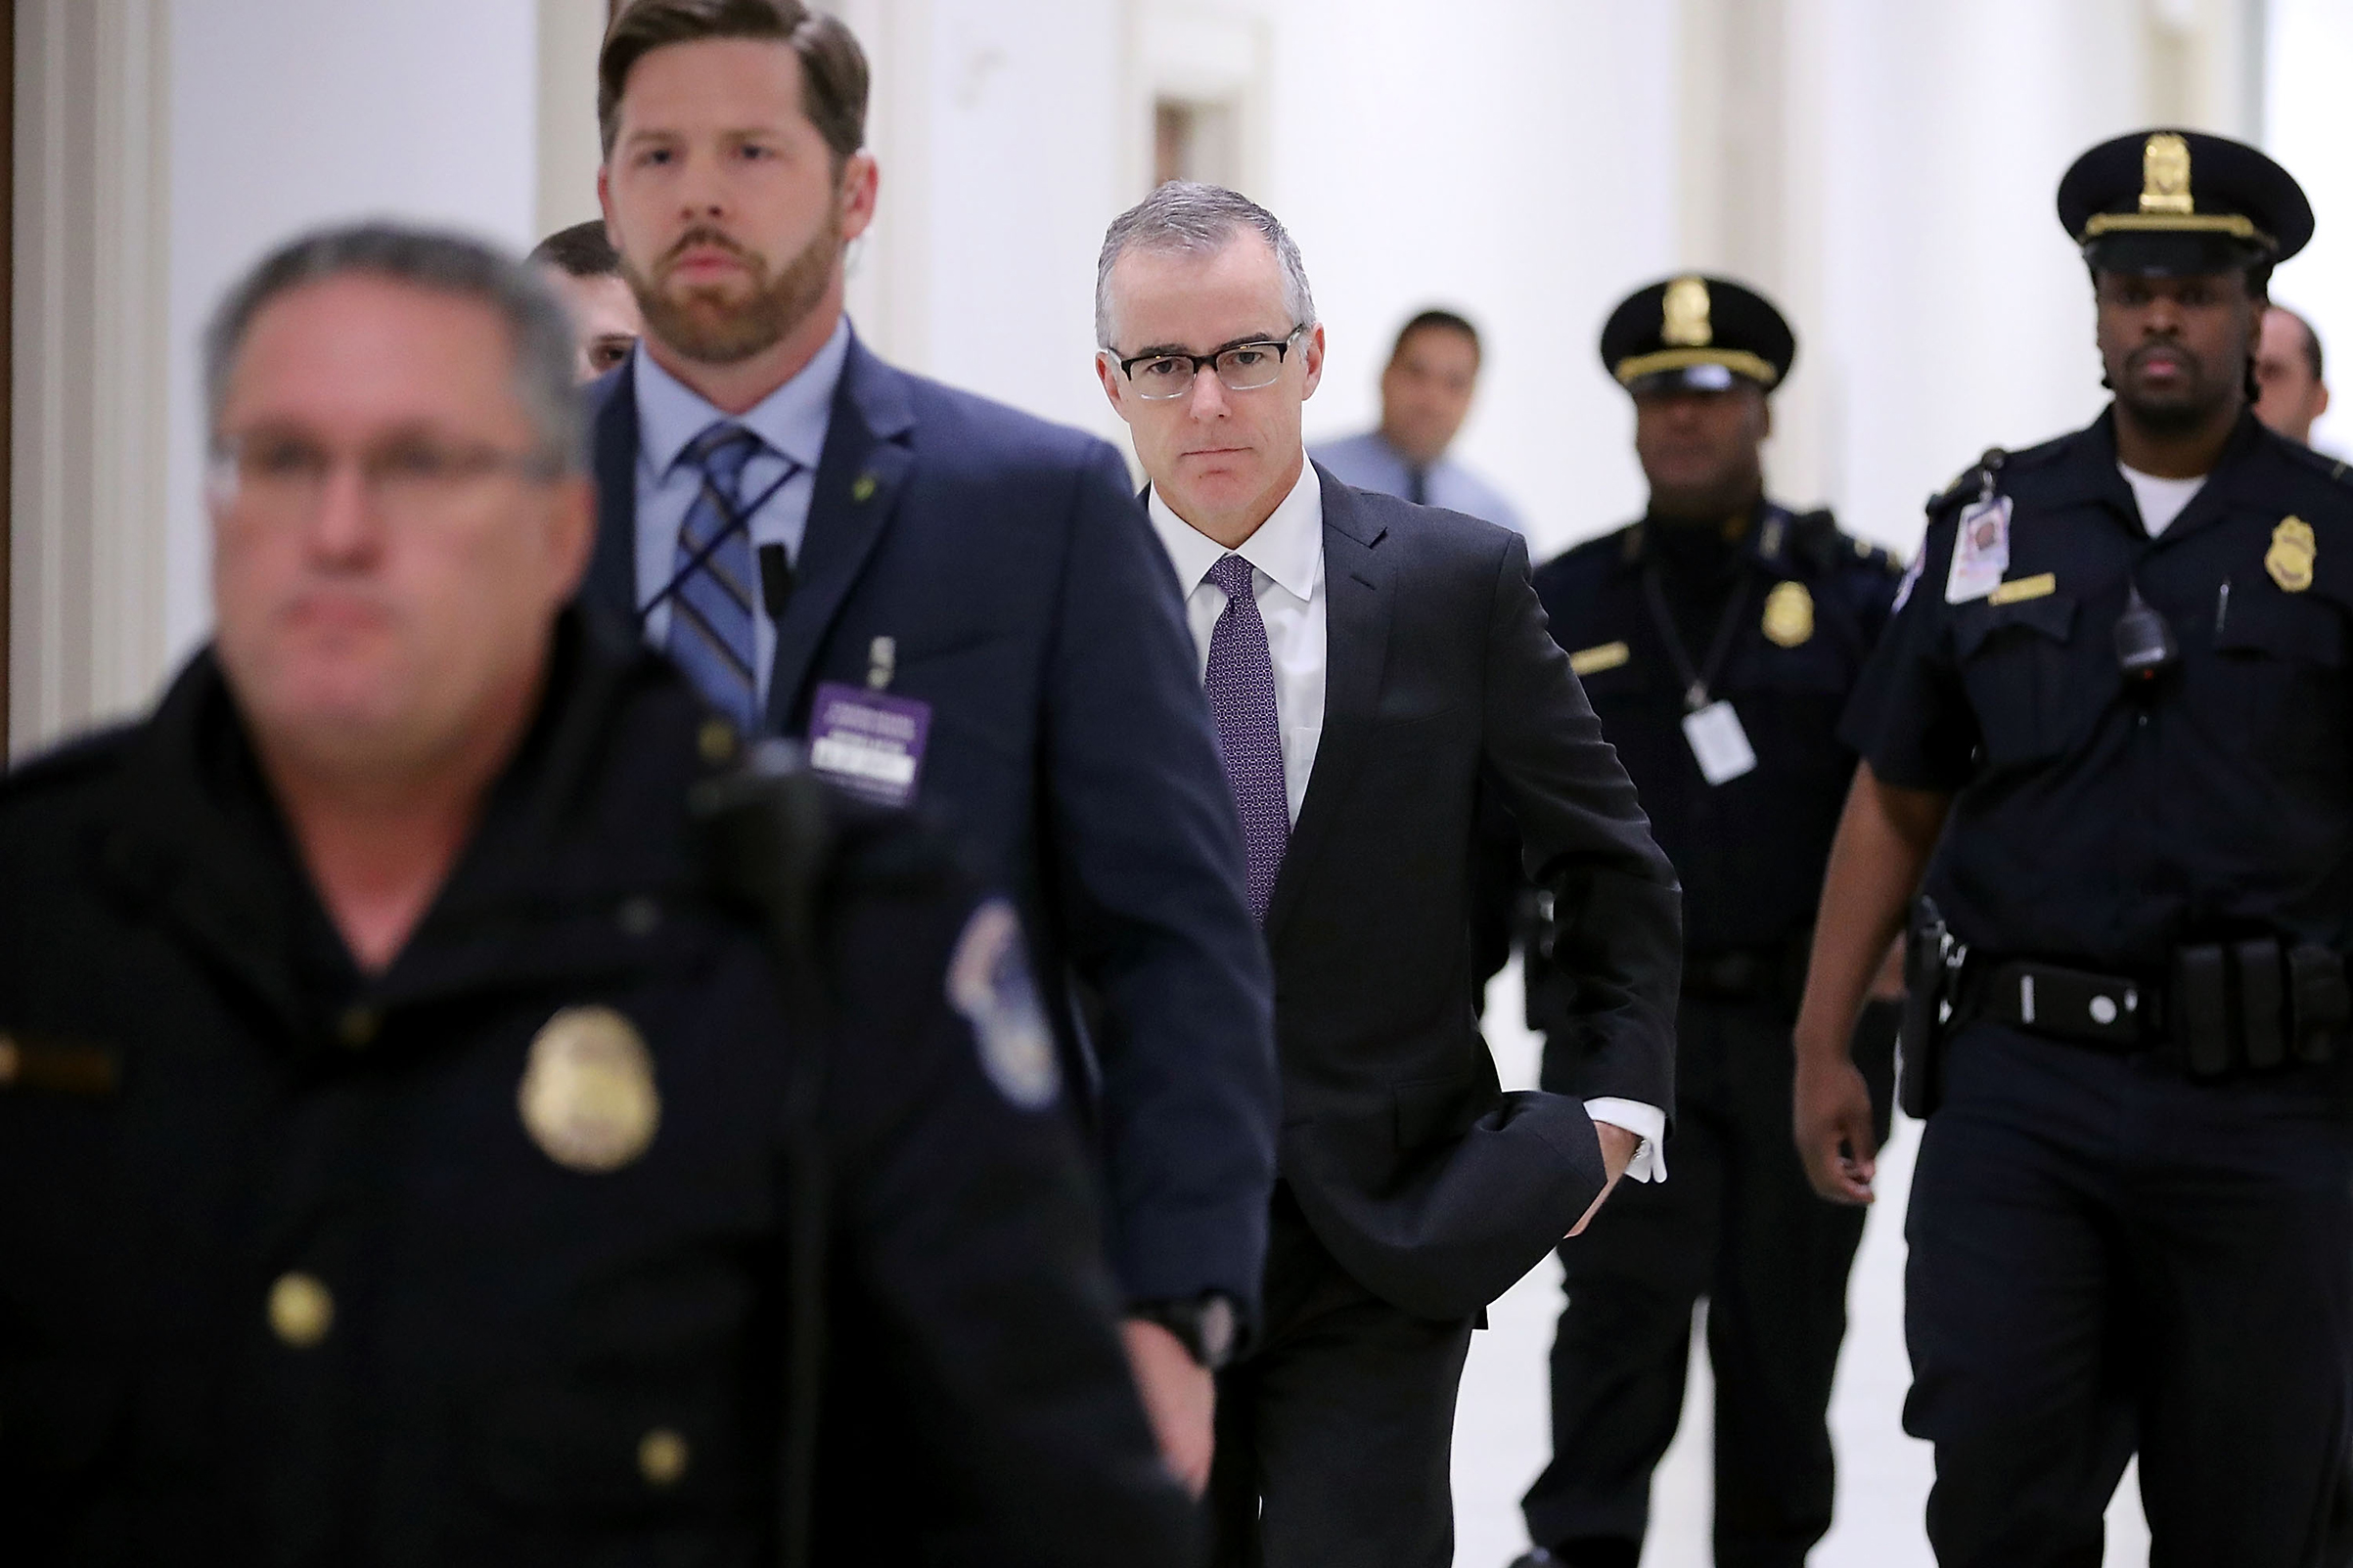 FBI deputy director Andrew McCabe, center, is escorted to a meeting with members of the Oversight and Government Reform and Judiciary committees in Washington on Dec. 21, 2017 (Chip Somodevilla—Getty Images)